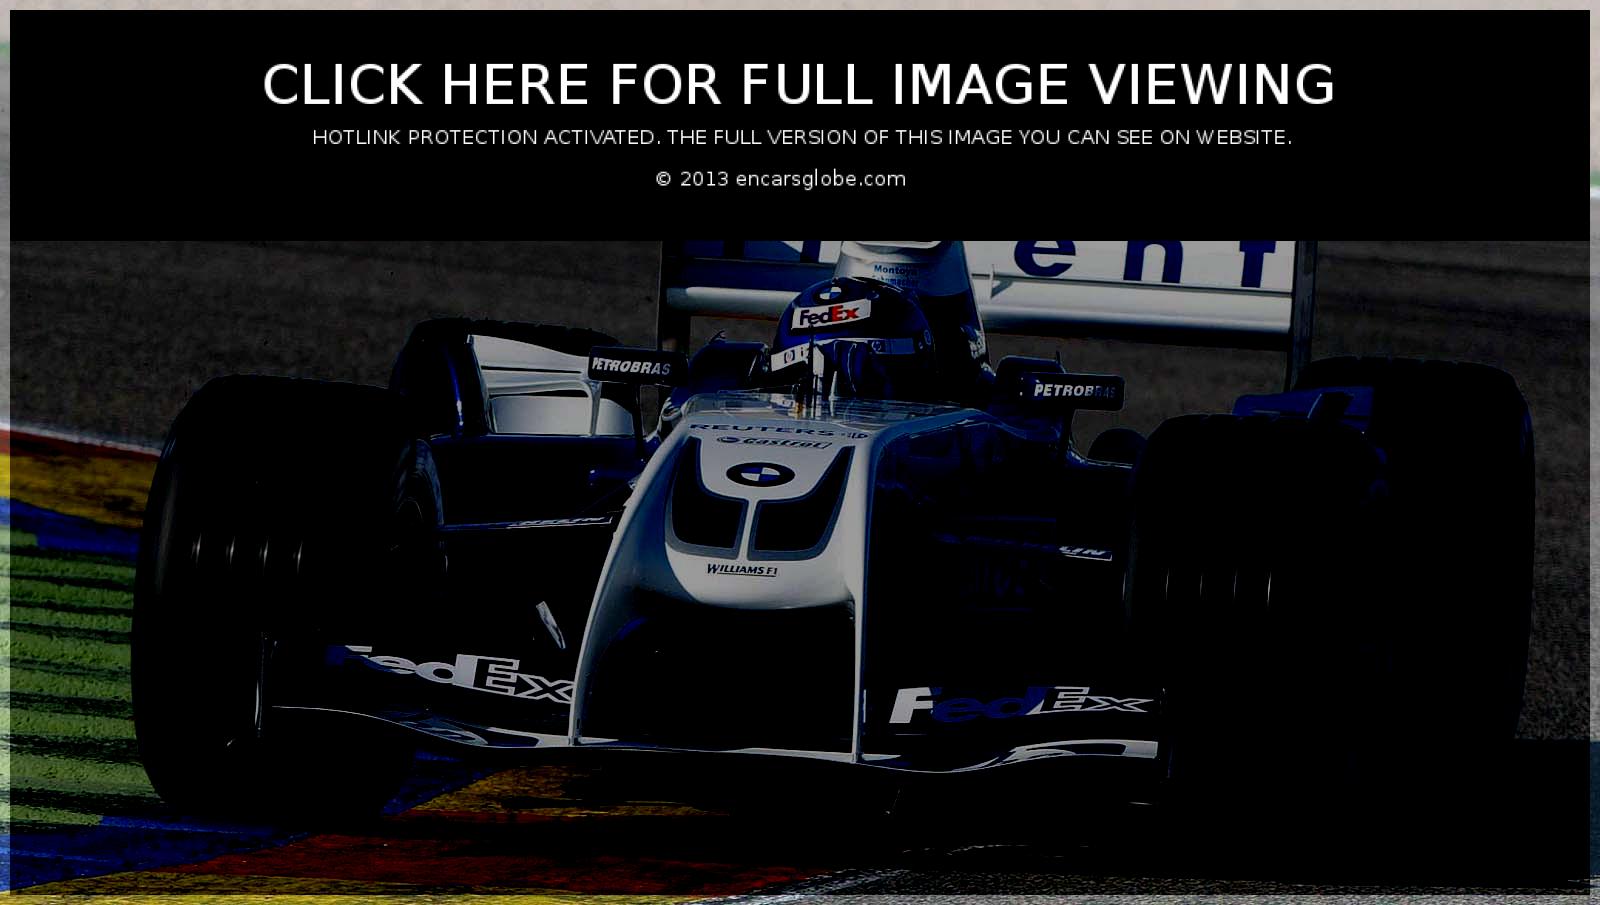 Williams FW26 Photo Gallery: Photo #08 out of 11, Image Size - 600 ...